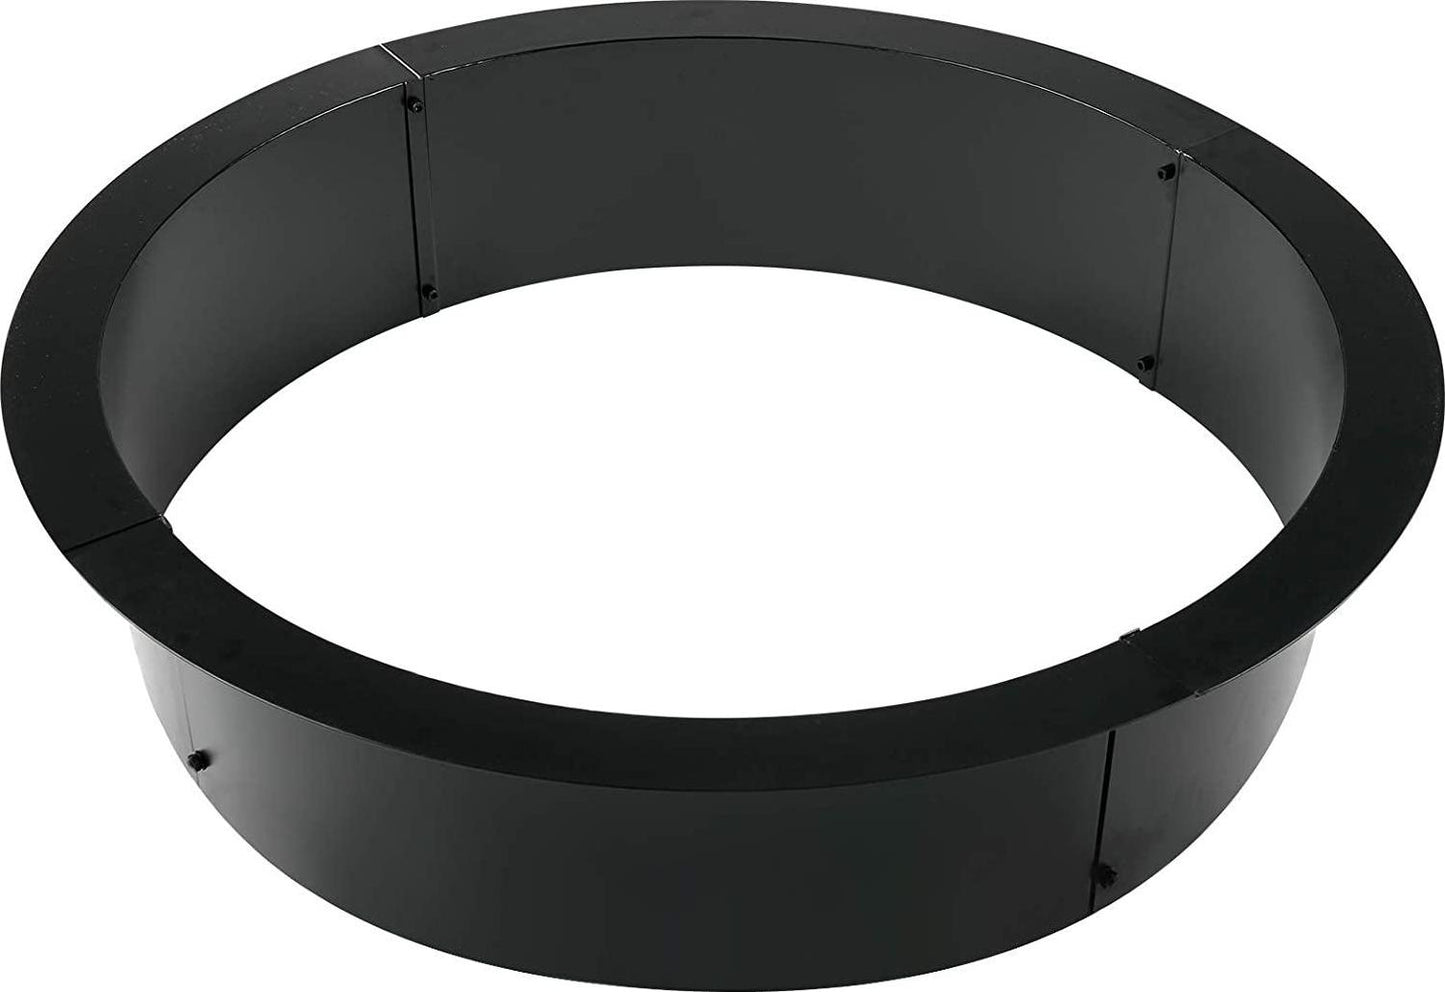 Fire Pit Ring 45-Inch Outer/39-Inch Inner Diameter Heavy Duty 3mm Metal Steel Rim - DIY Fire Pit Rim Above or In-Ground for Camping Outdoors, Backyard (45 x 39 x 10 Inch)